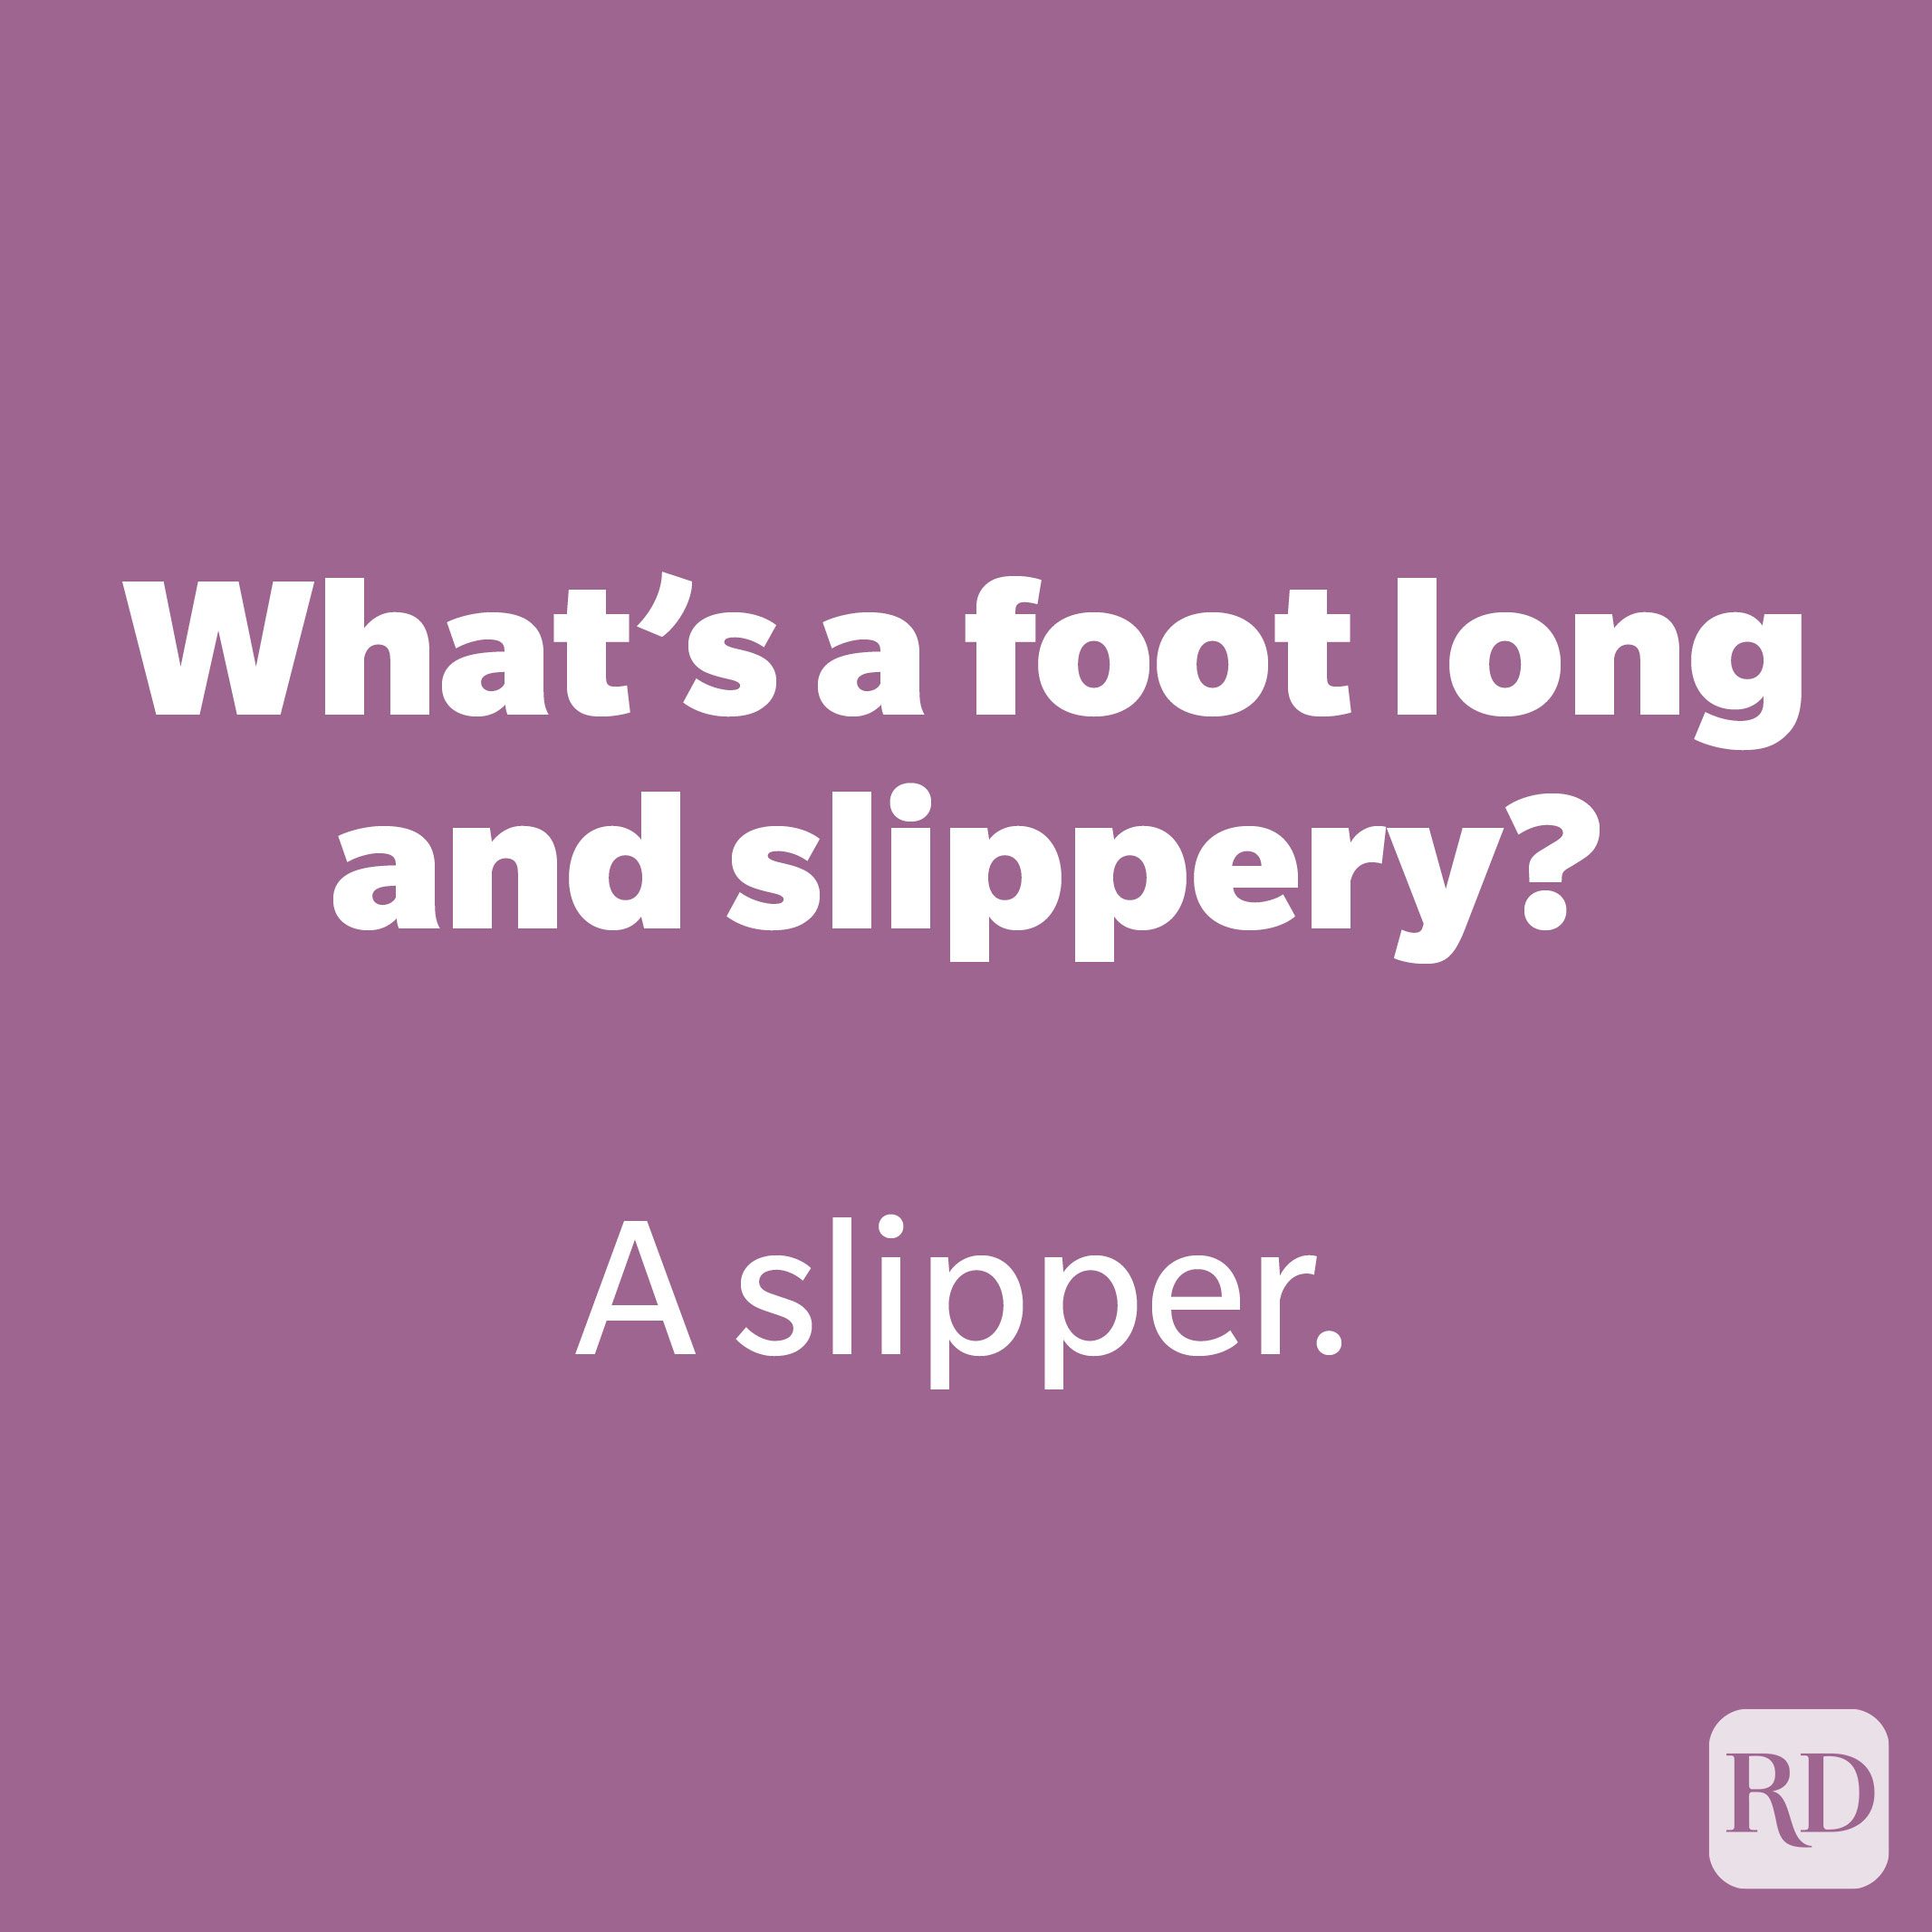 What’s a foot long and slippery?